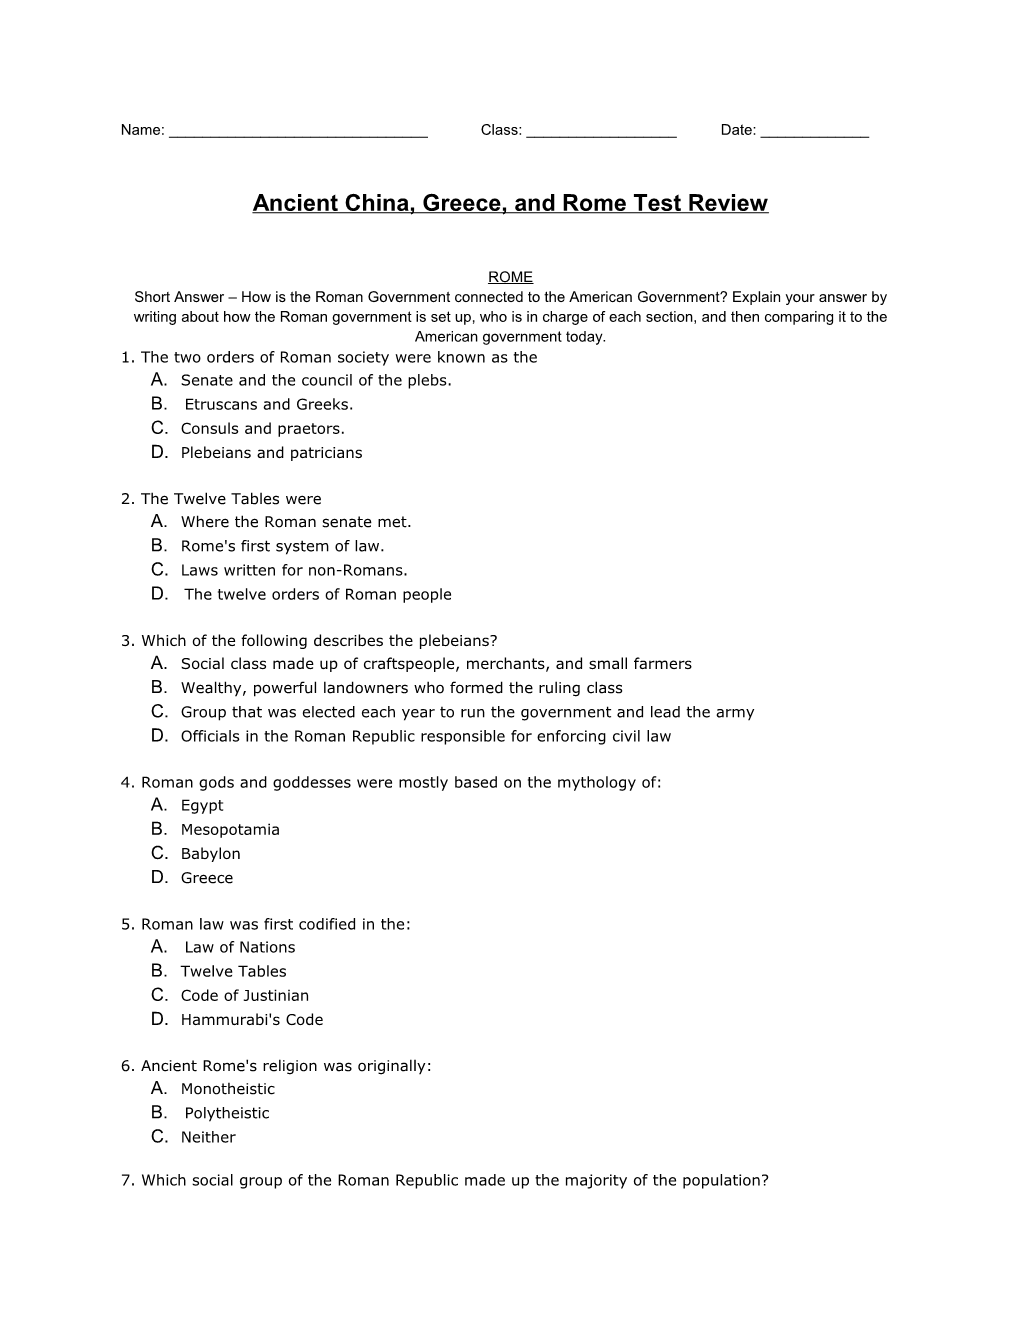 Ancient China, Greece, and Rome Test Review